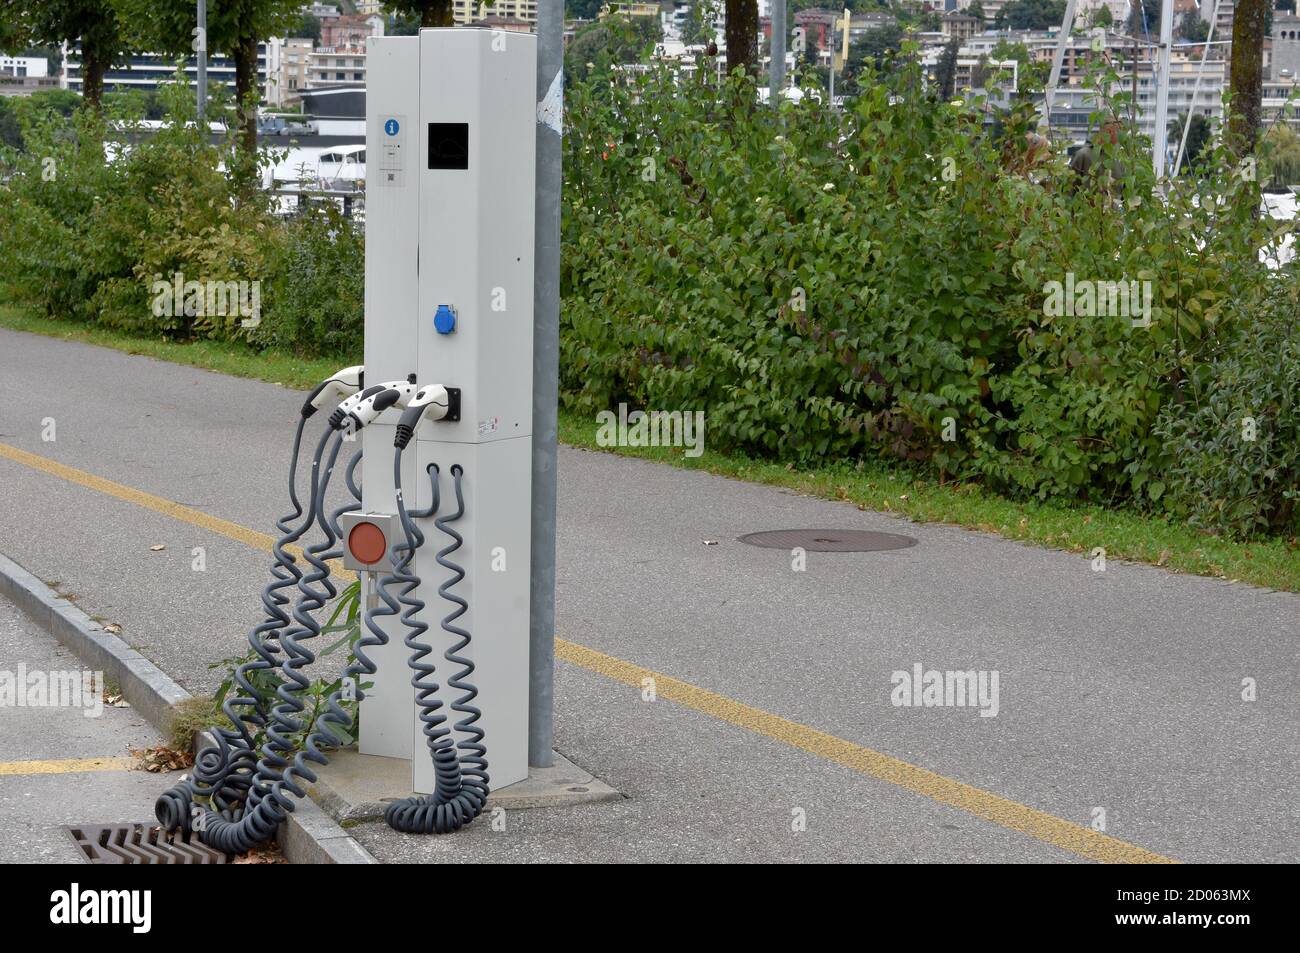 Charging station for electric cars and plug-in hybrid in the city on the street so that cars with alternative drive can charge while parking. Stock Photo